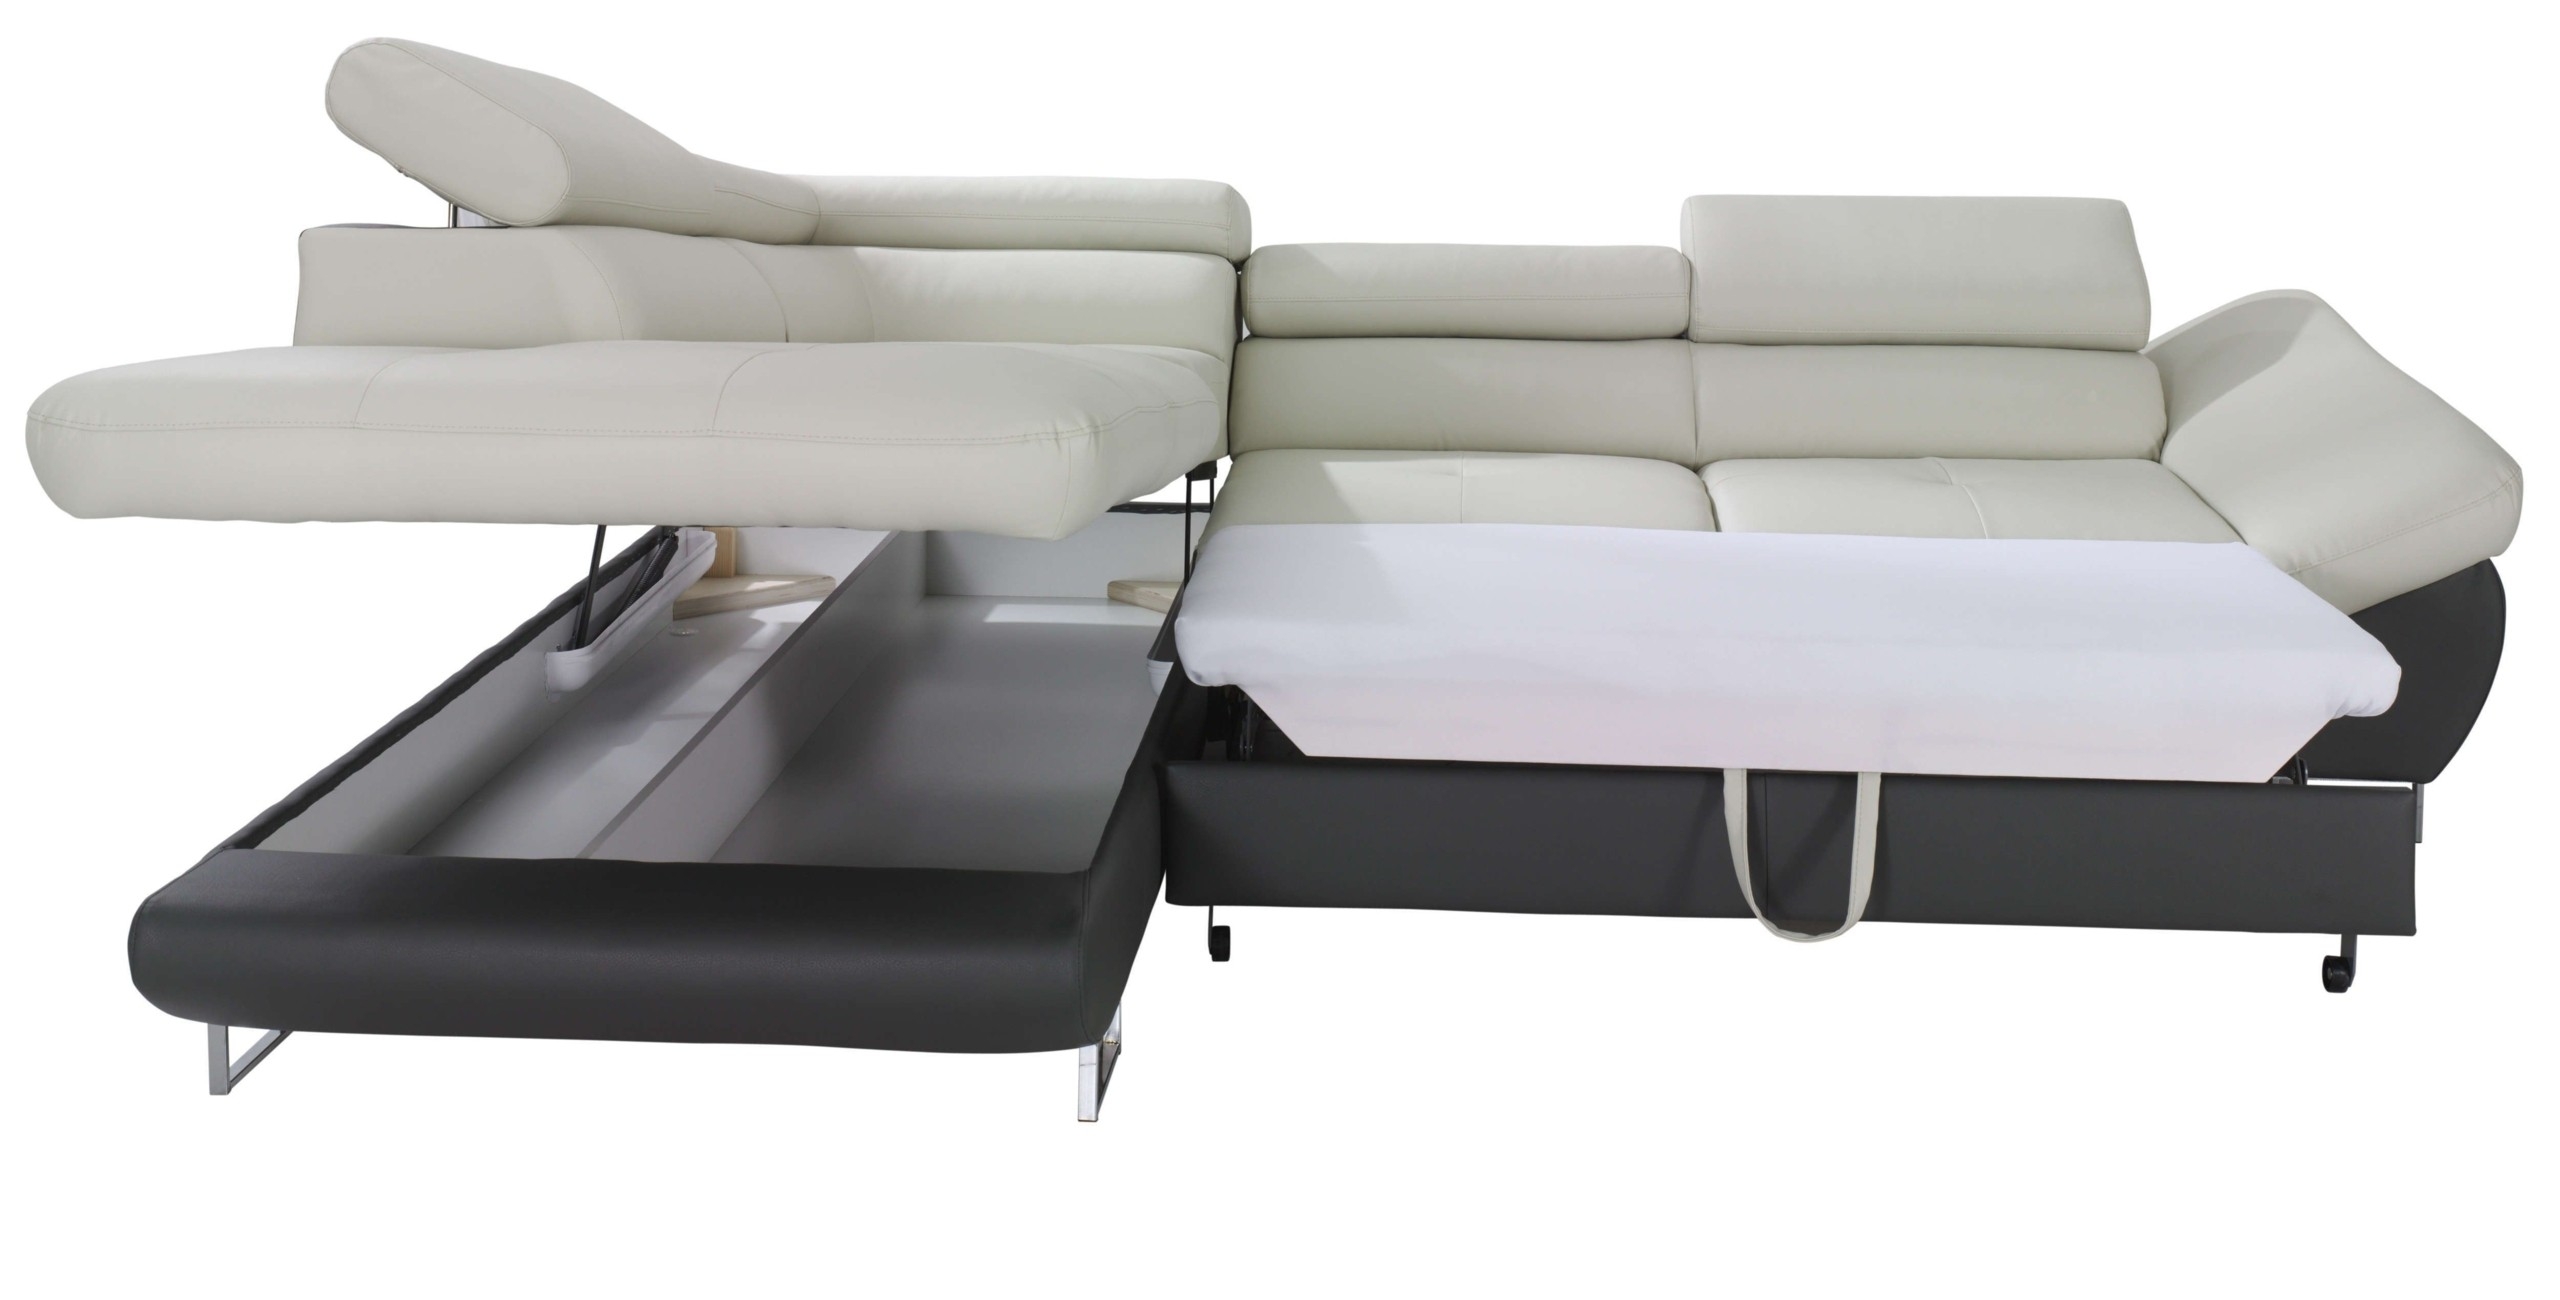 Sectional Sofas With Storage 